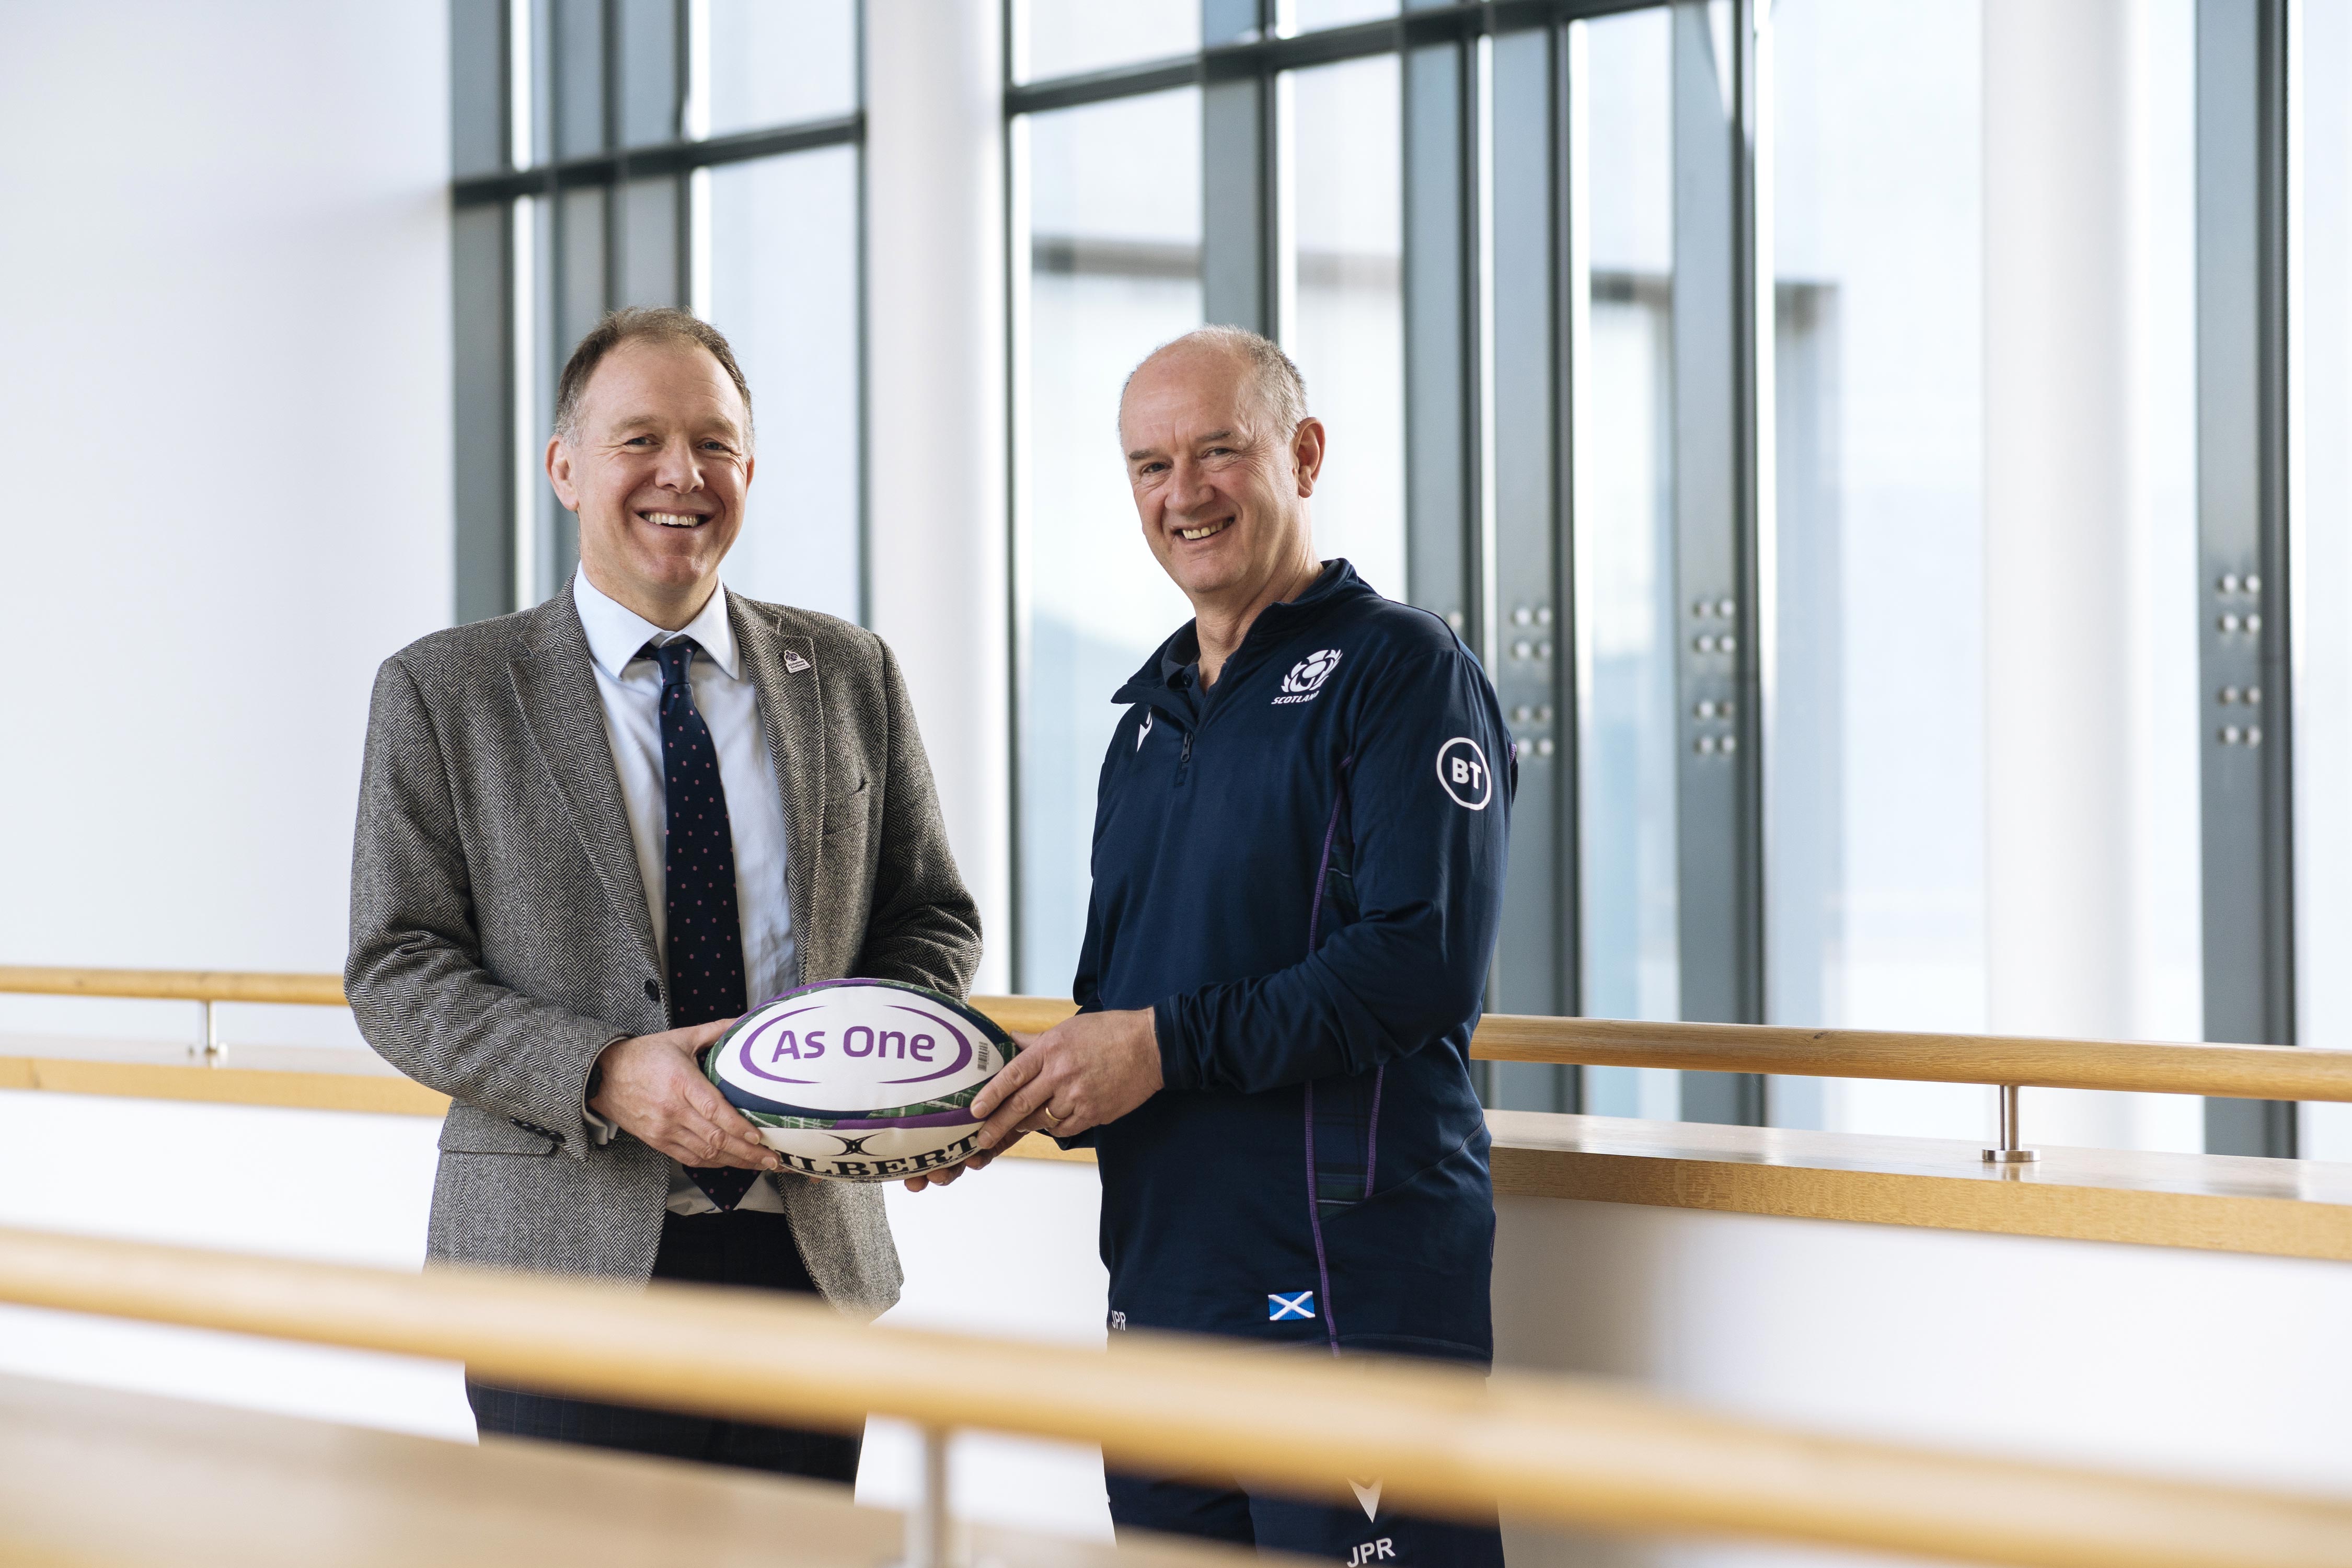 Spire Edinburgh Hospitals continue healthcare partnership with Scottish Rugby